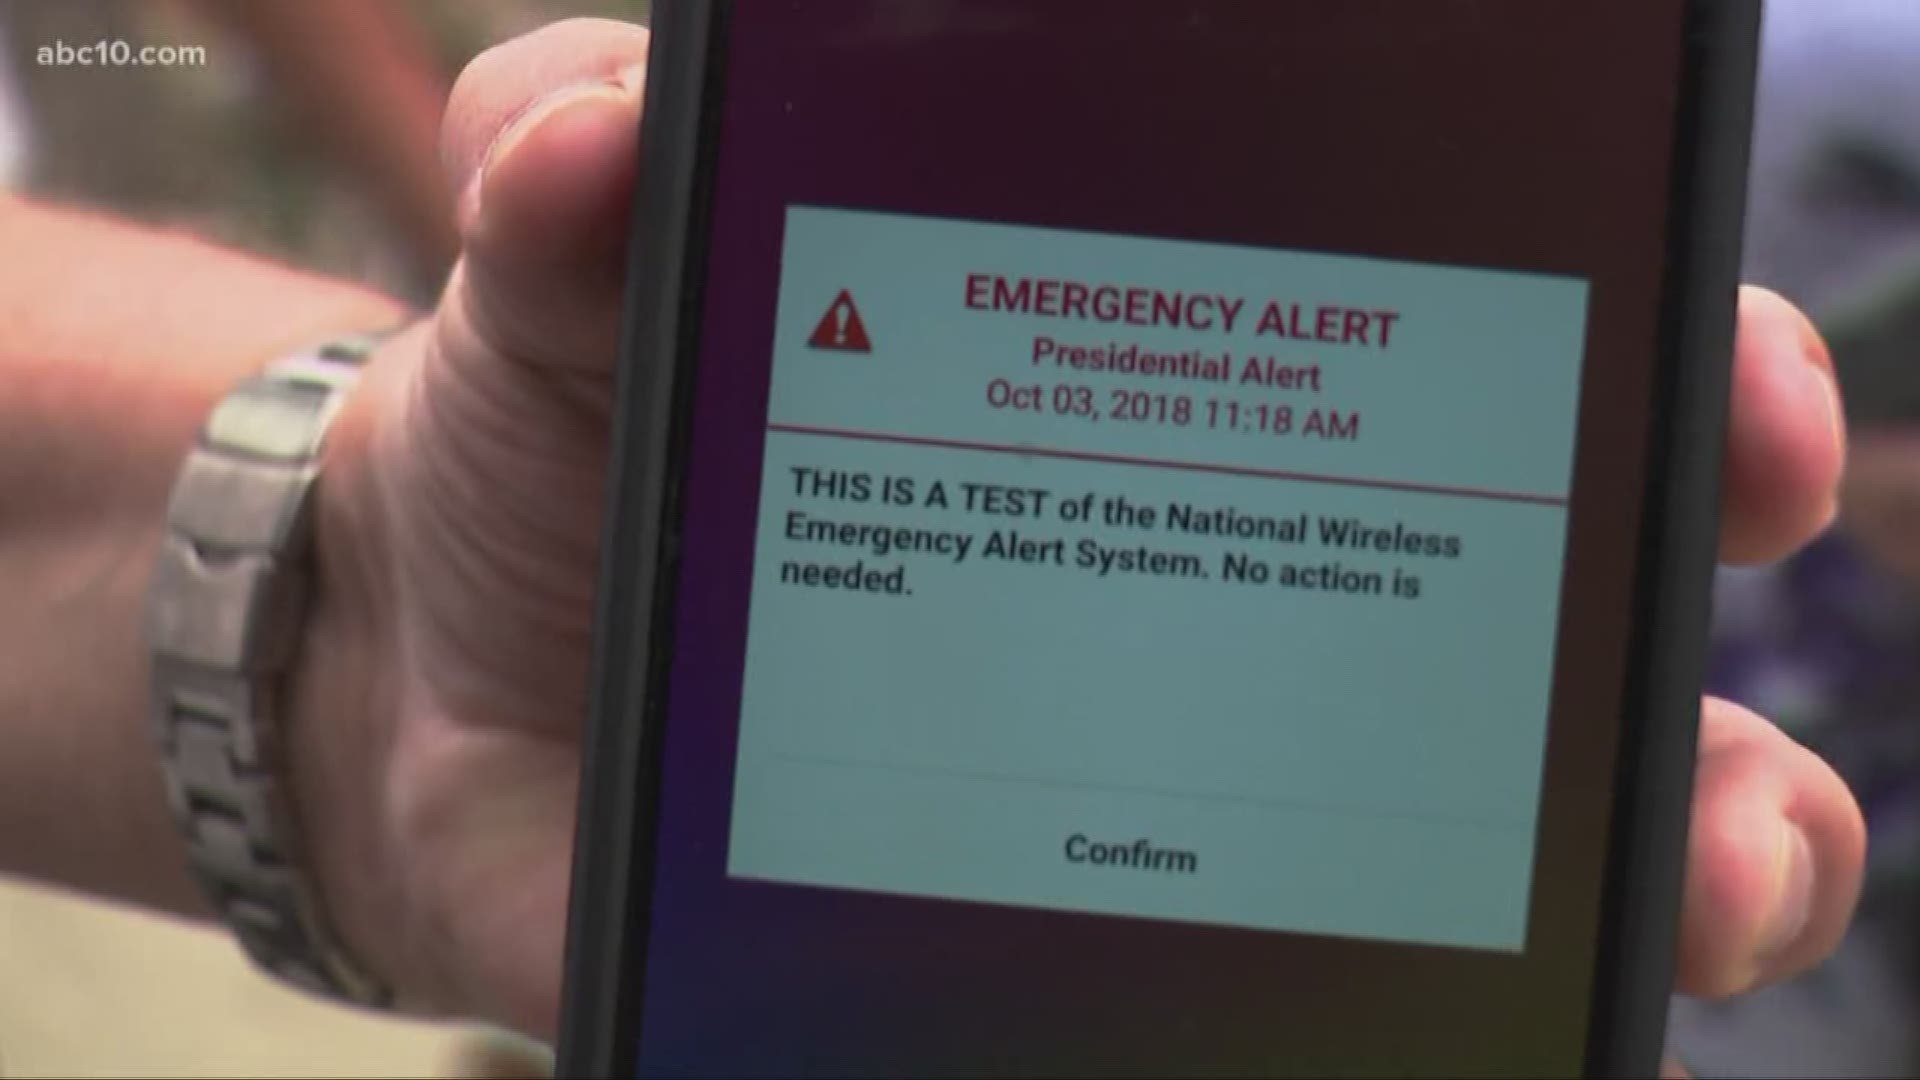 The 'presidential alert' was sent to cell phone owners in the U.S. on Wednesday October 3.